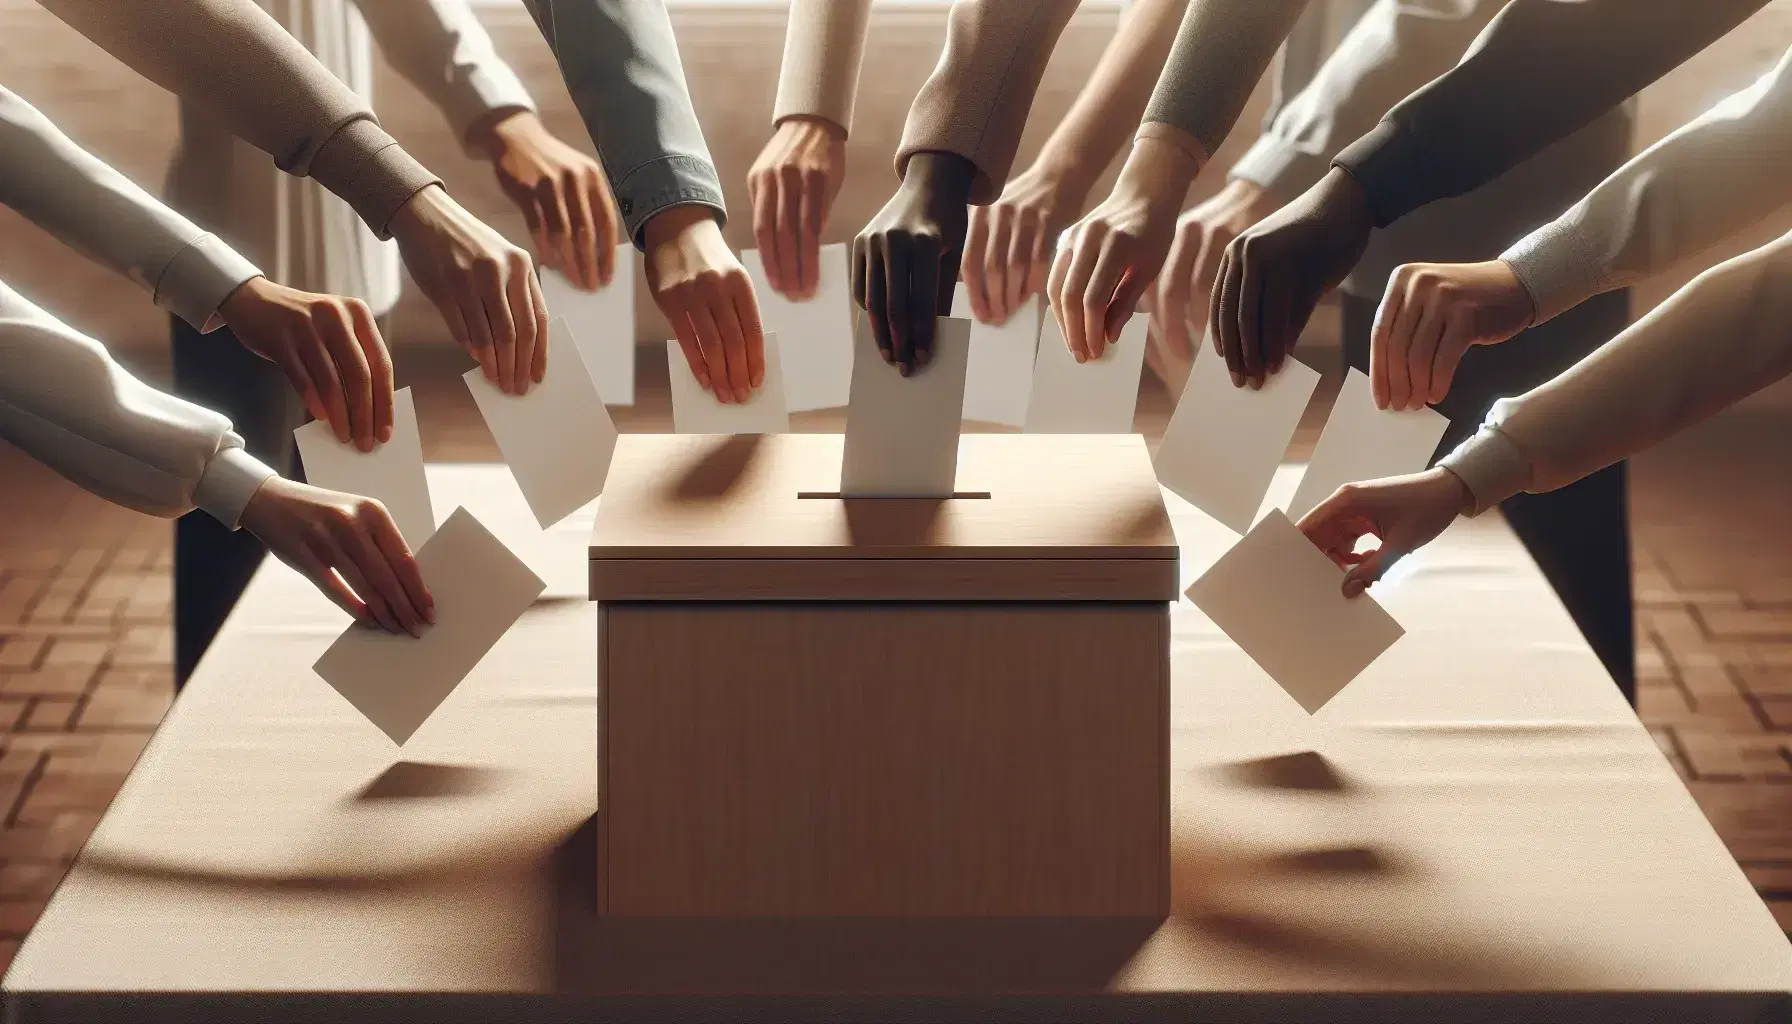 Diverse hands casting ballots into a wooden box on a draped table, symbolizing inclusive voting in a blurred public setting.